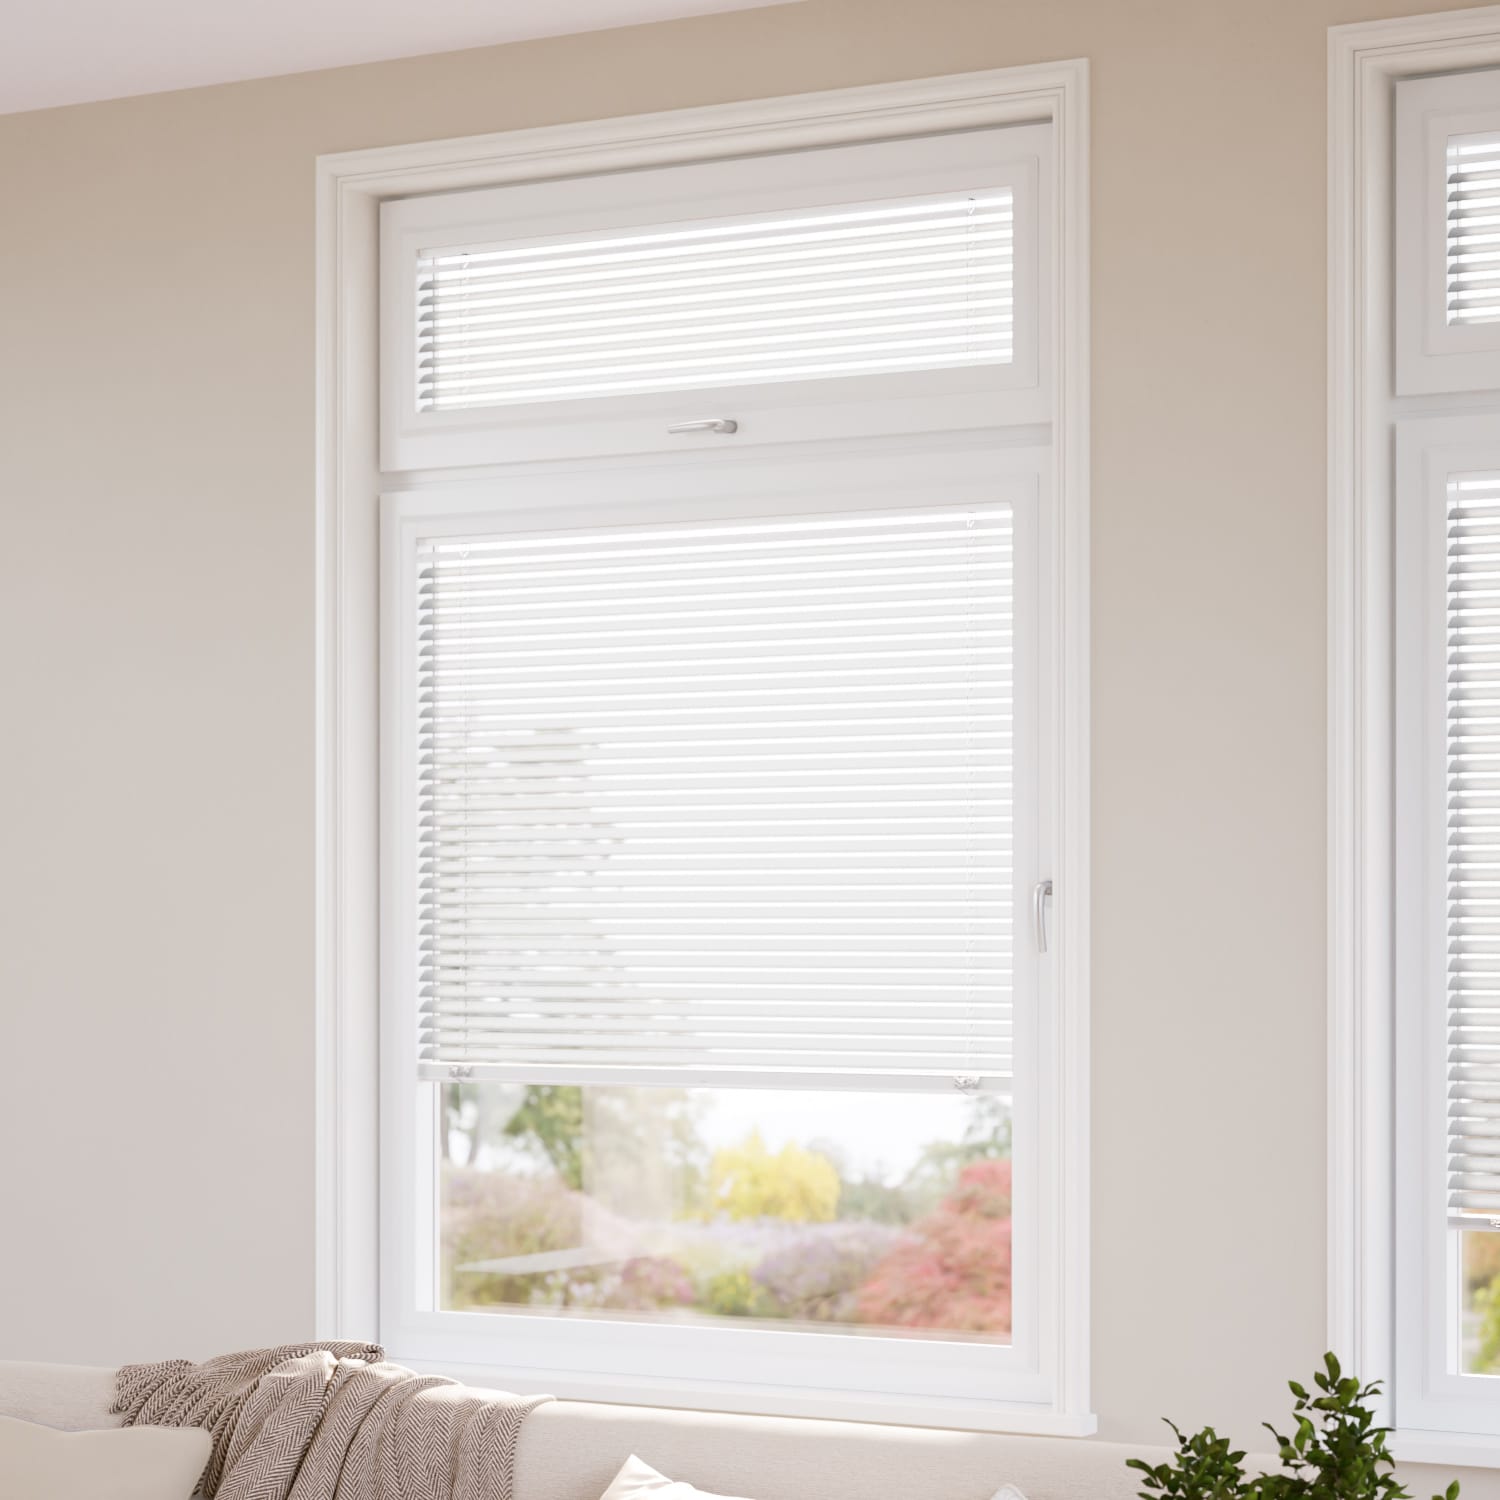 Pearl Glacier Patio Blinds, Are Perfect Fit Blinds Suitable For Sliding Patio Doors